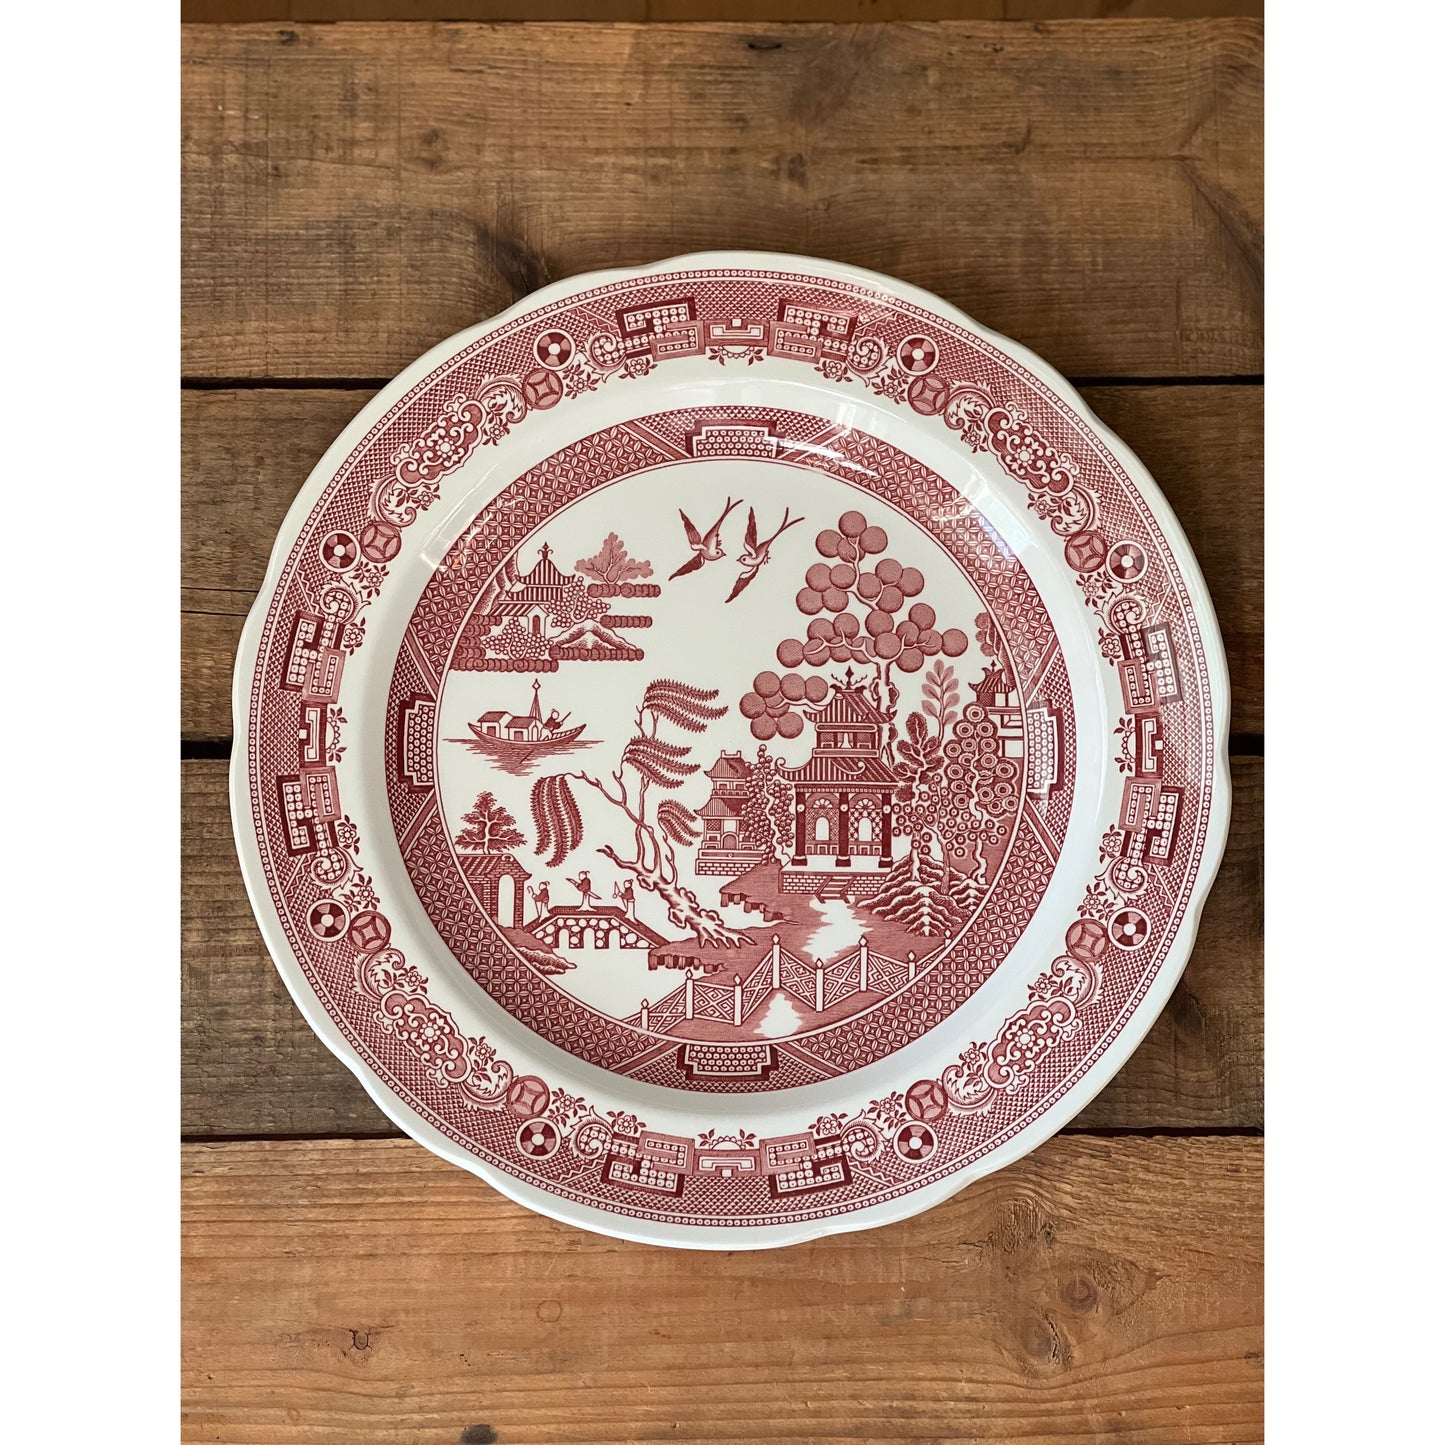 Spode Georgian Collection Willow Dinner Plate